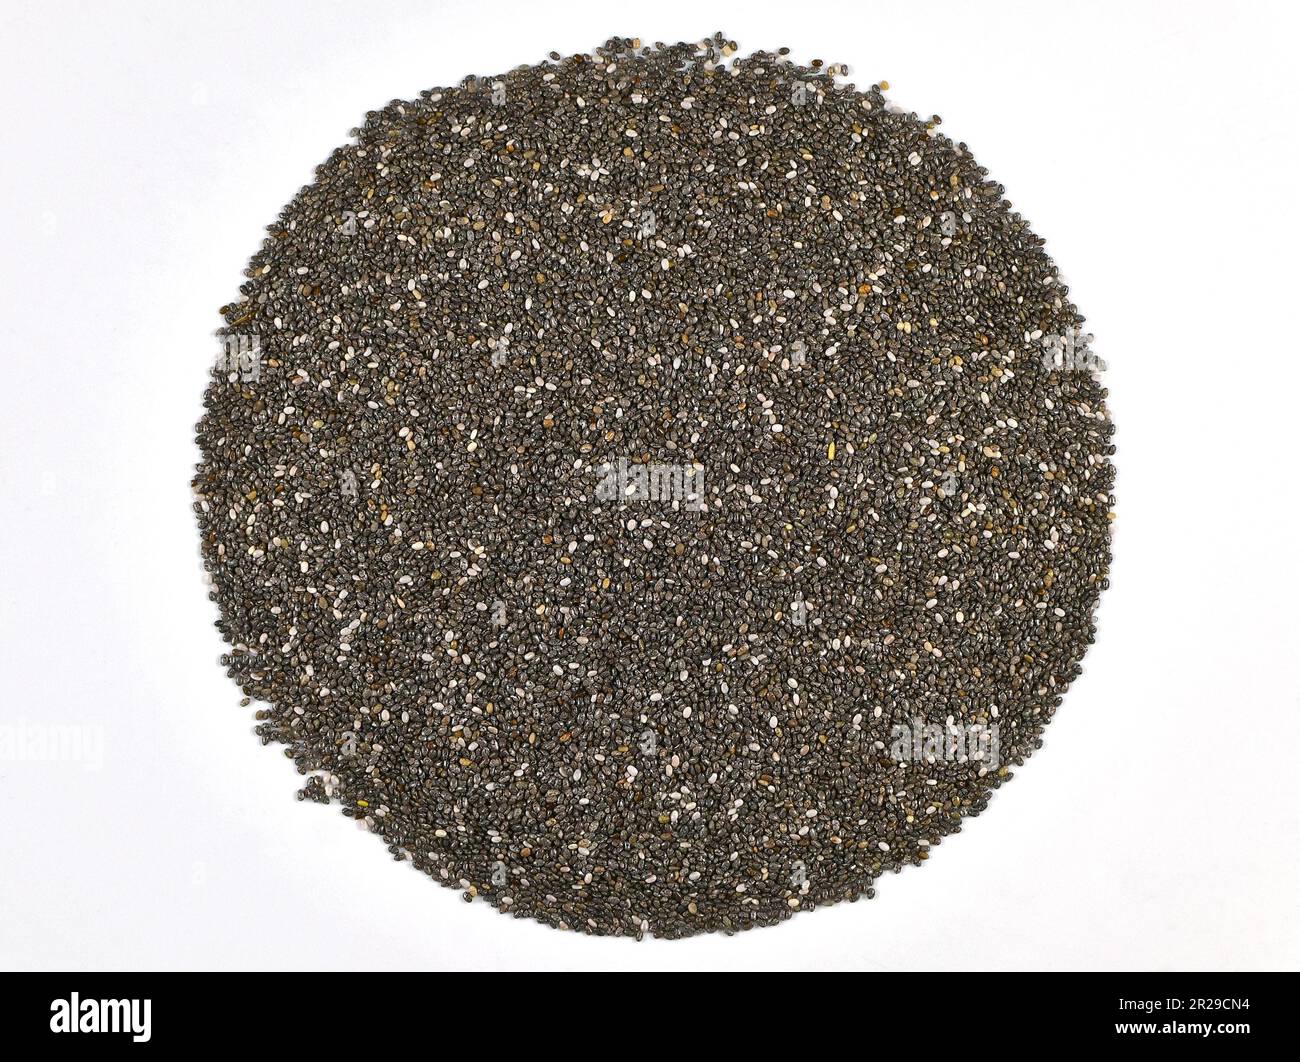 Chia seeds on a plain white background. Health food concept. Stock Photo